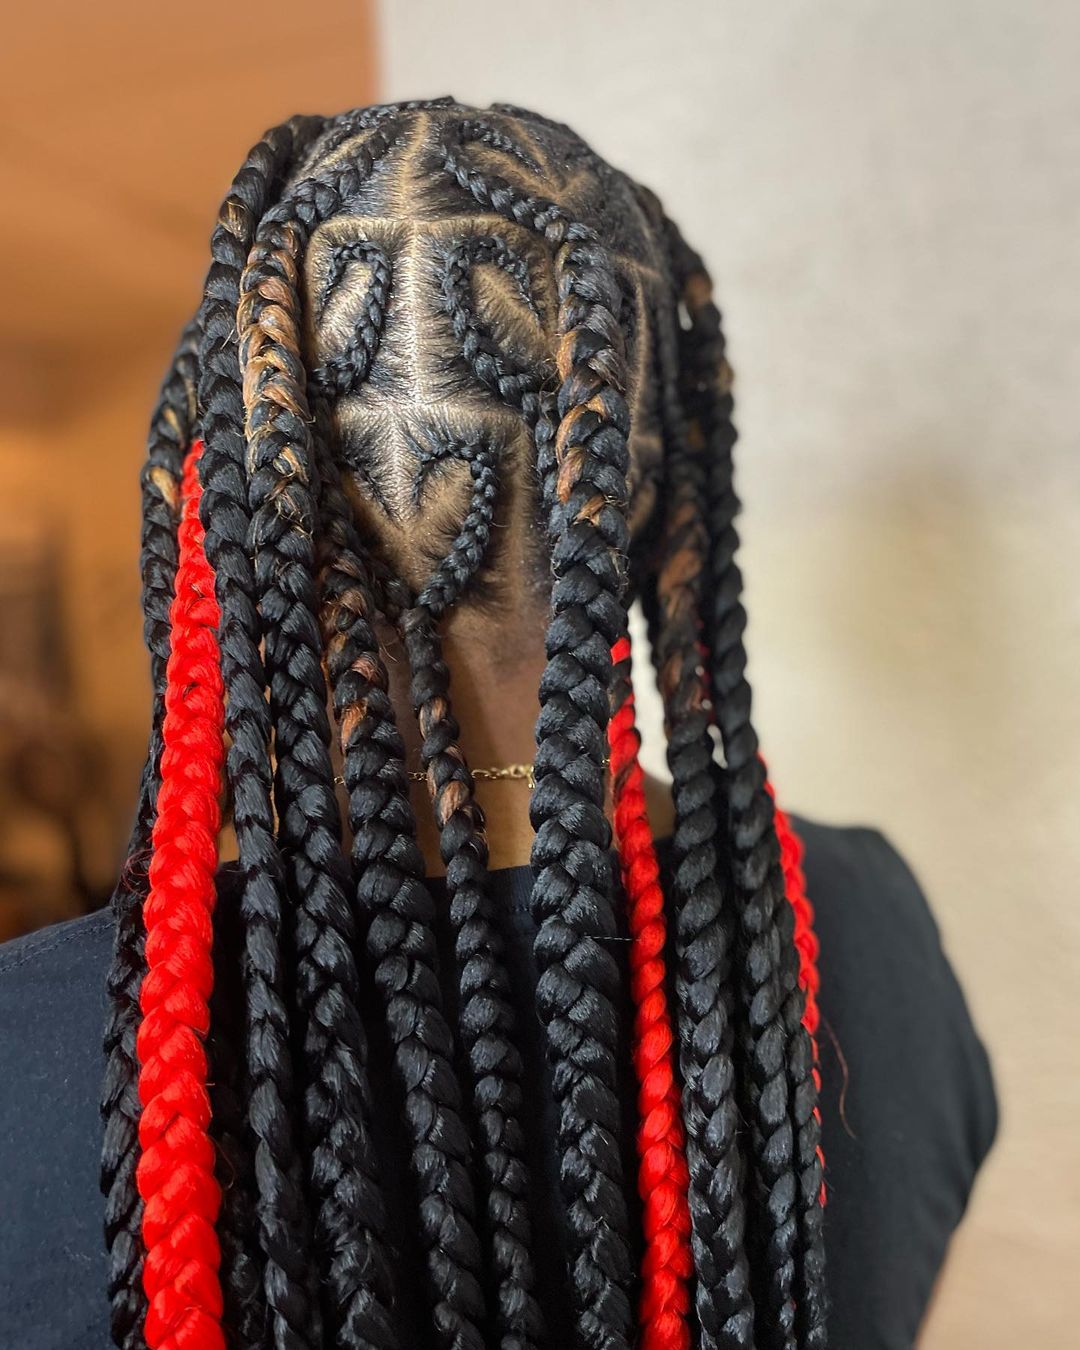 19. Jumbo Black And Red Knotless Braids With Heart Design